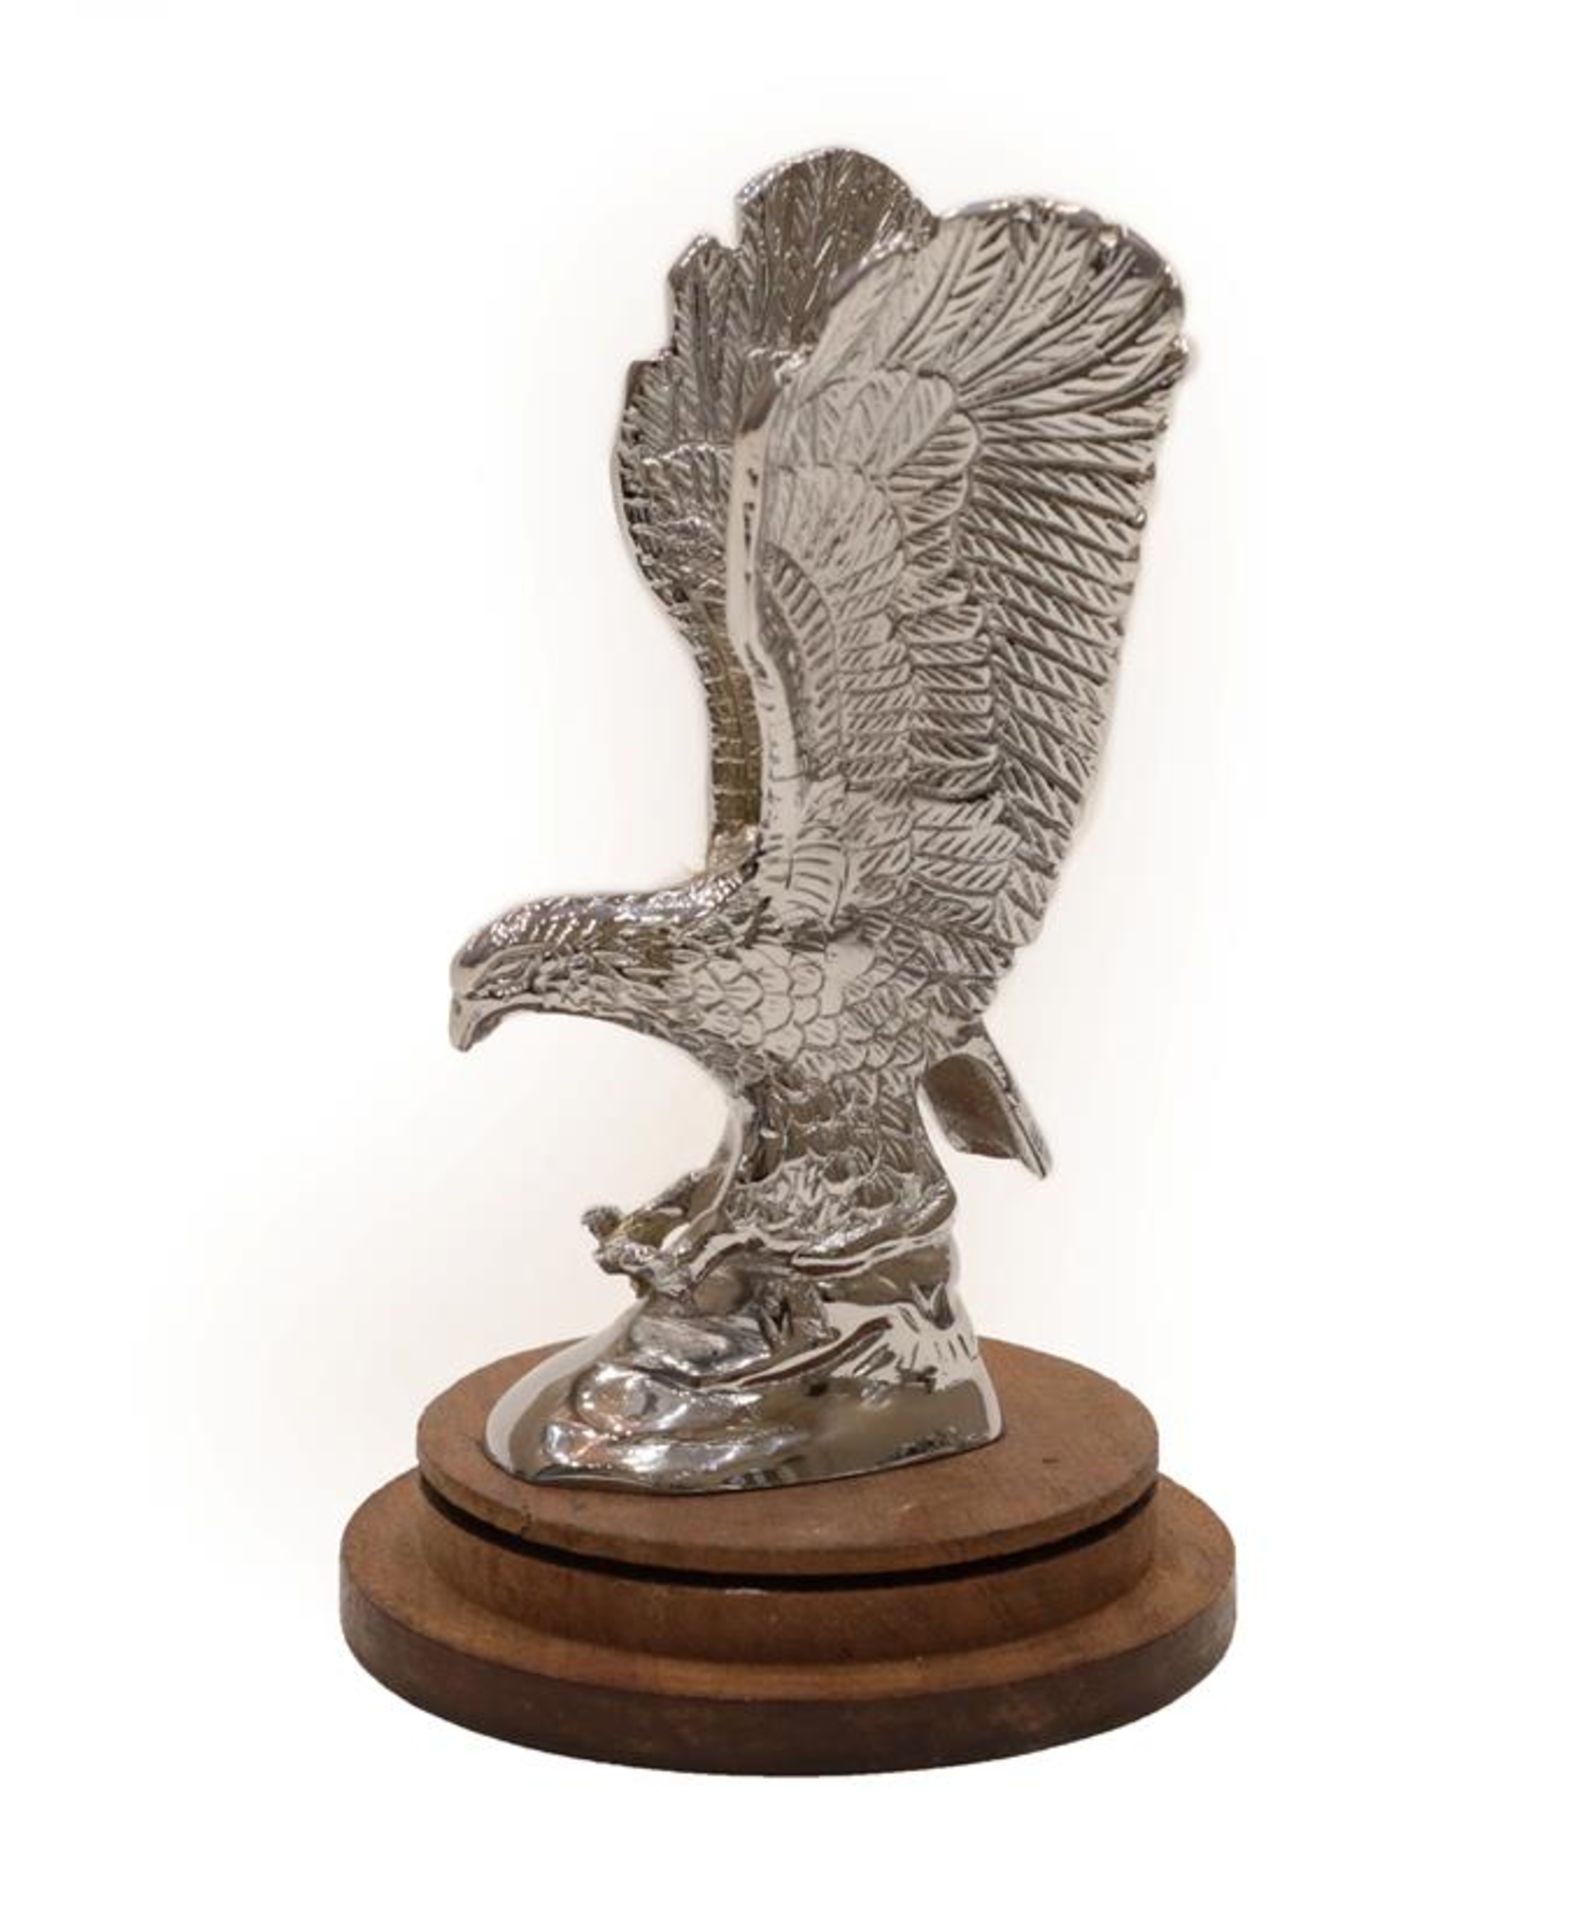 Alvis: A 1930's Chrome Plated Car Mascot as an Eagle, mounted on a circular wooden base, 15cm high